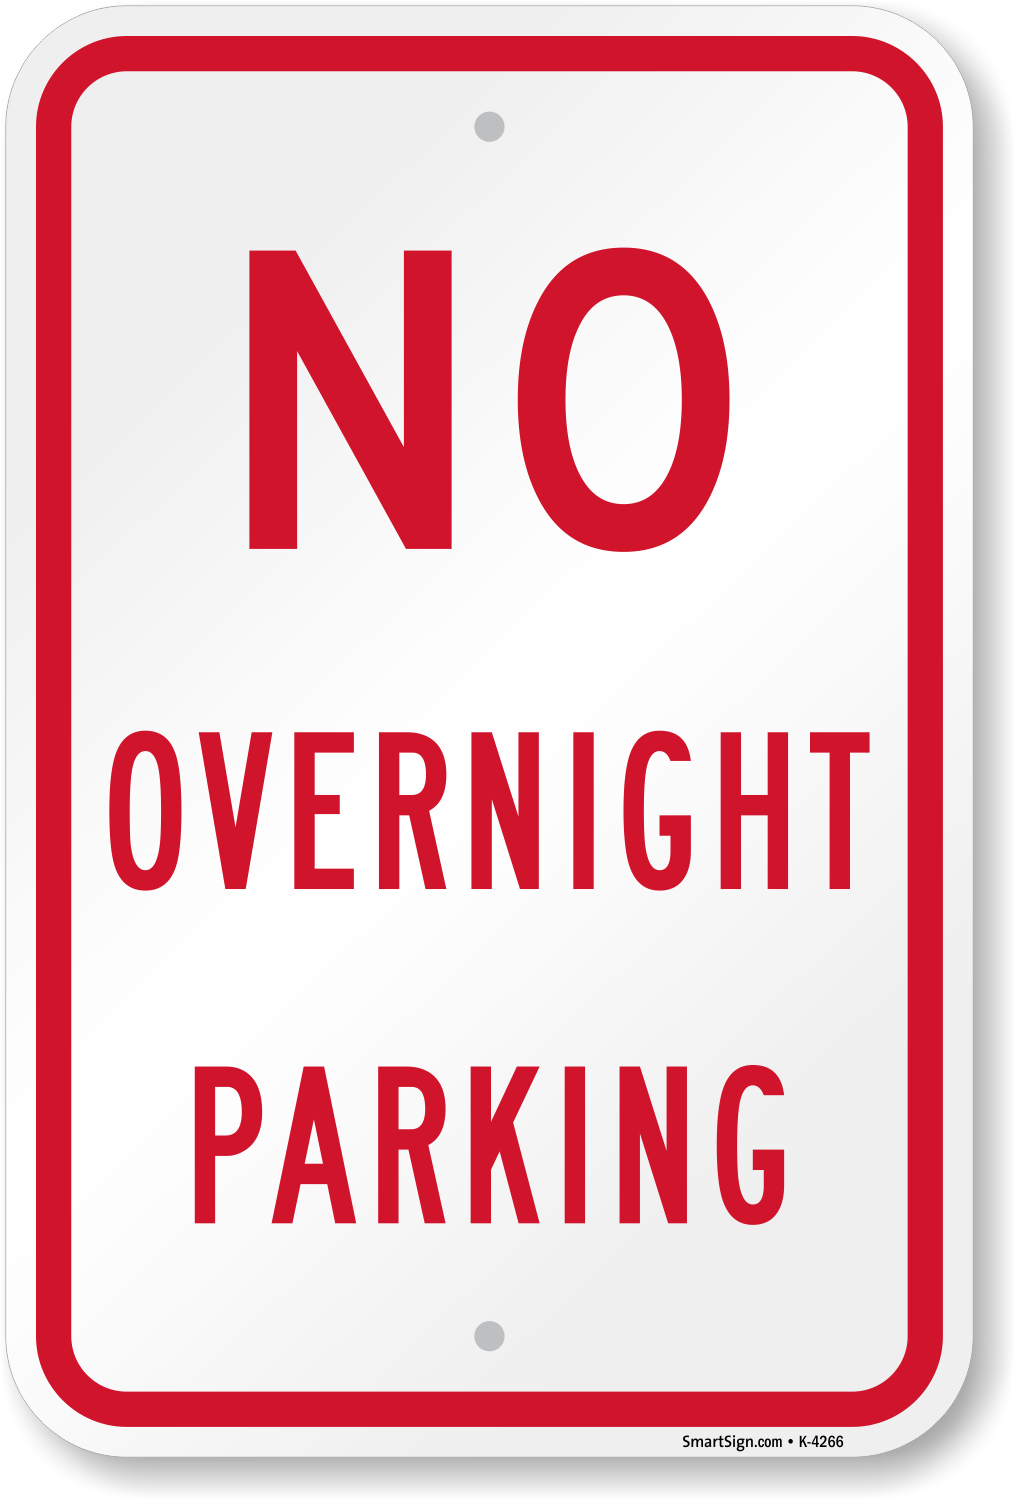 No Overnight Parking Sign 6 in. x 12 in. Aluminum